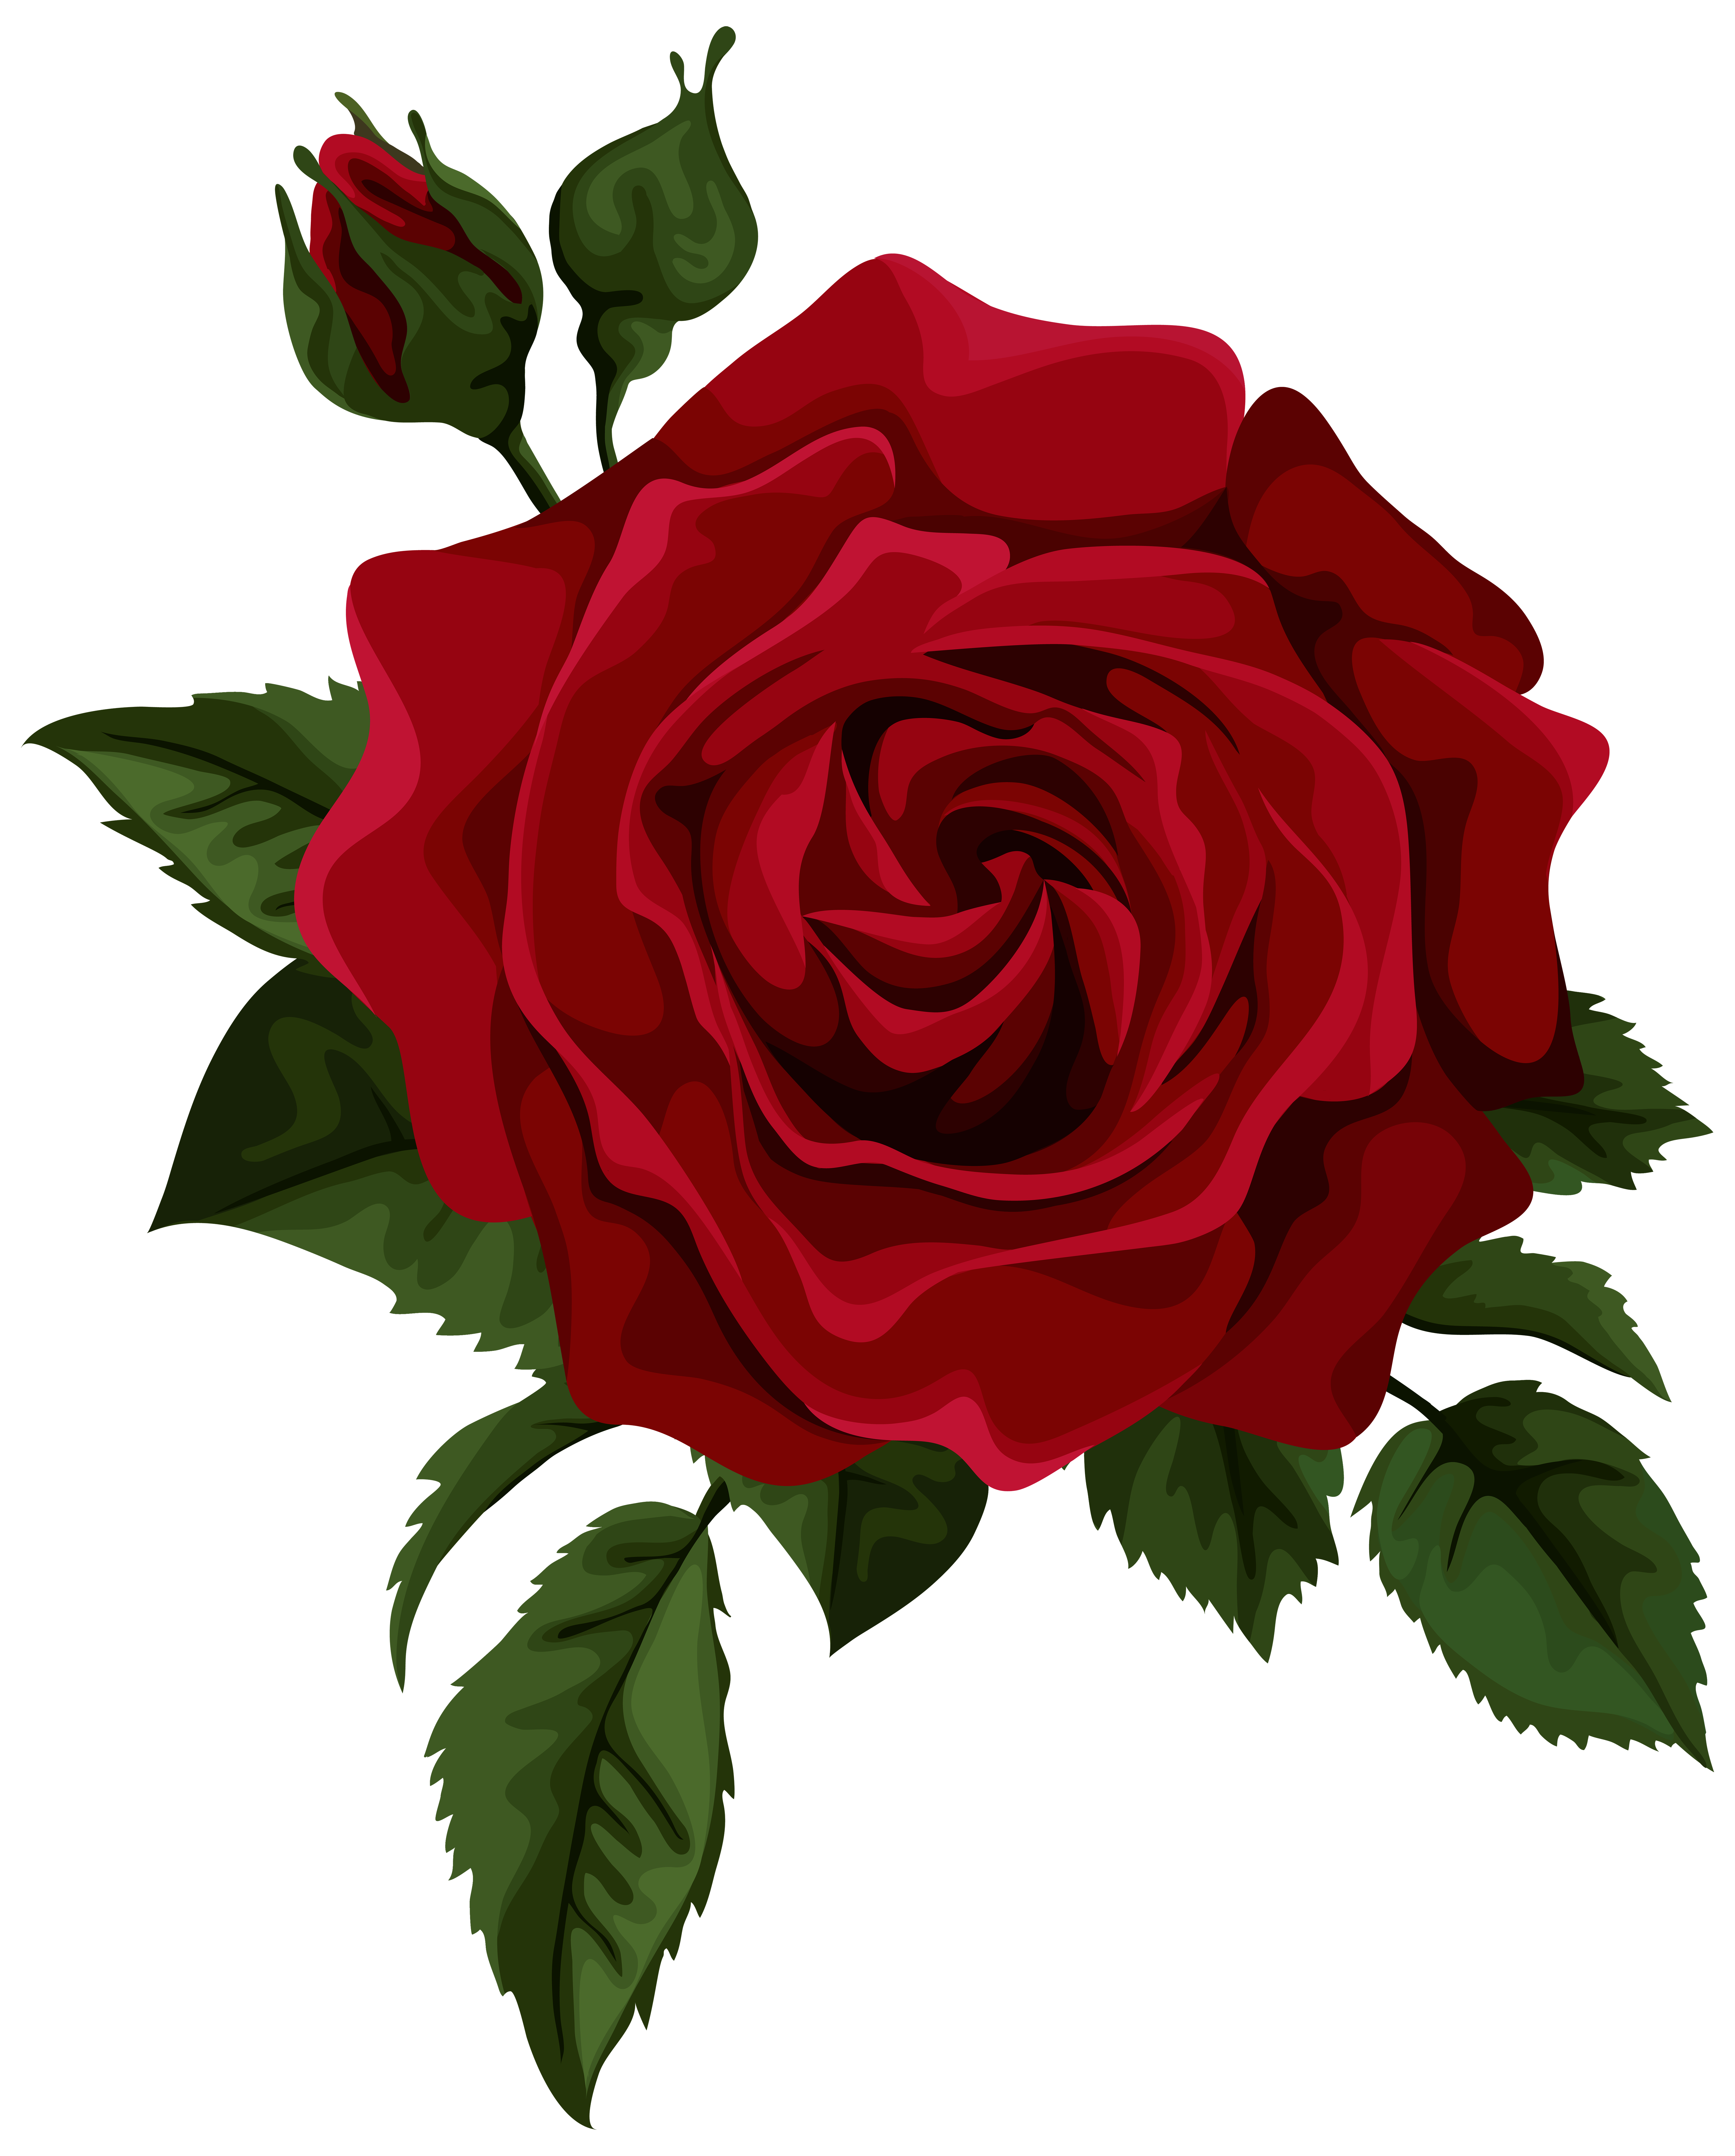 Red Rose with Bud Transparent PNG Clip Art Picture